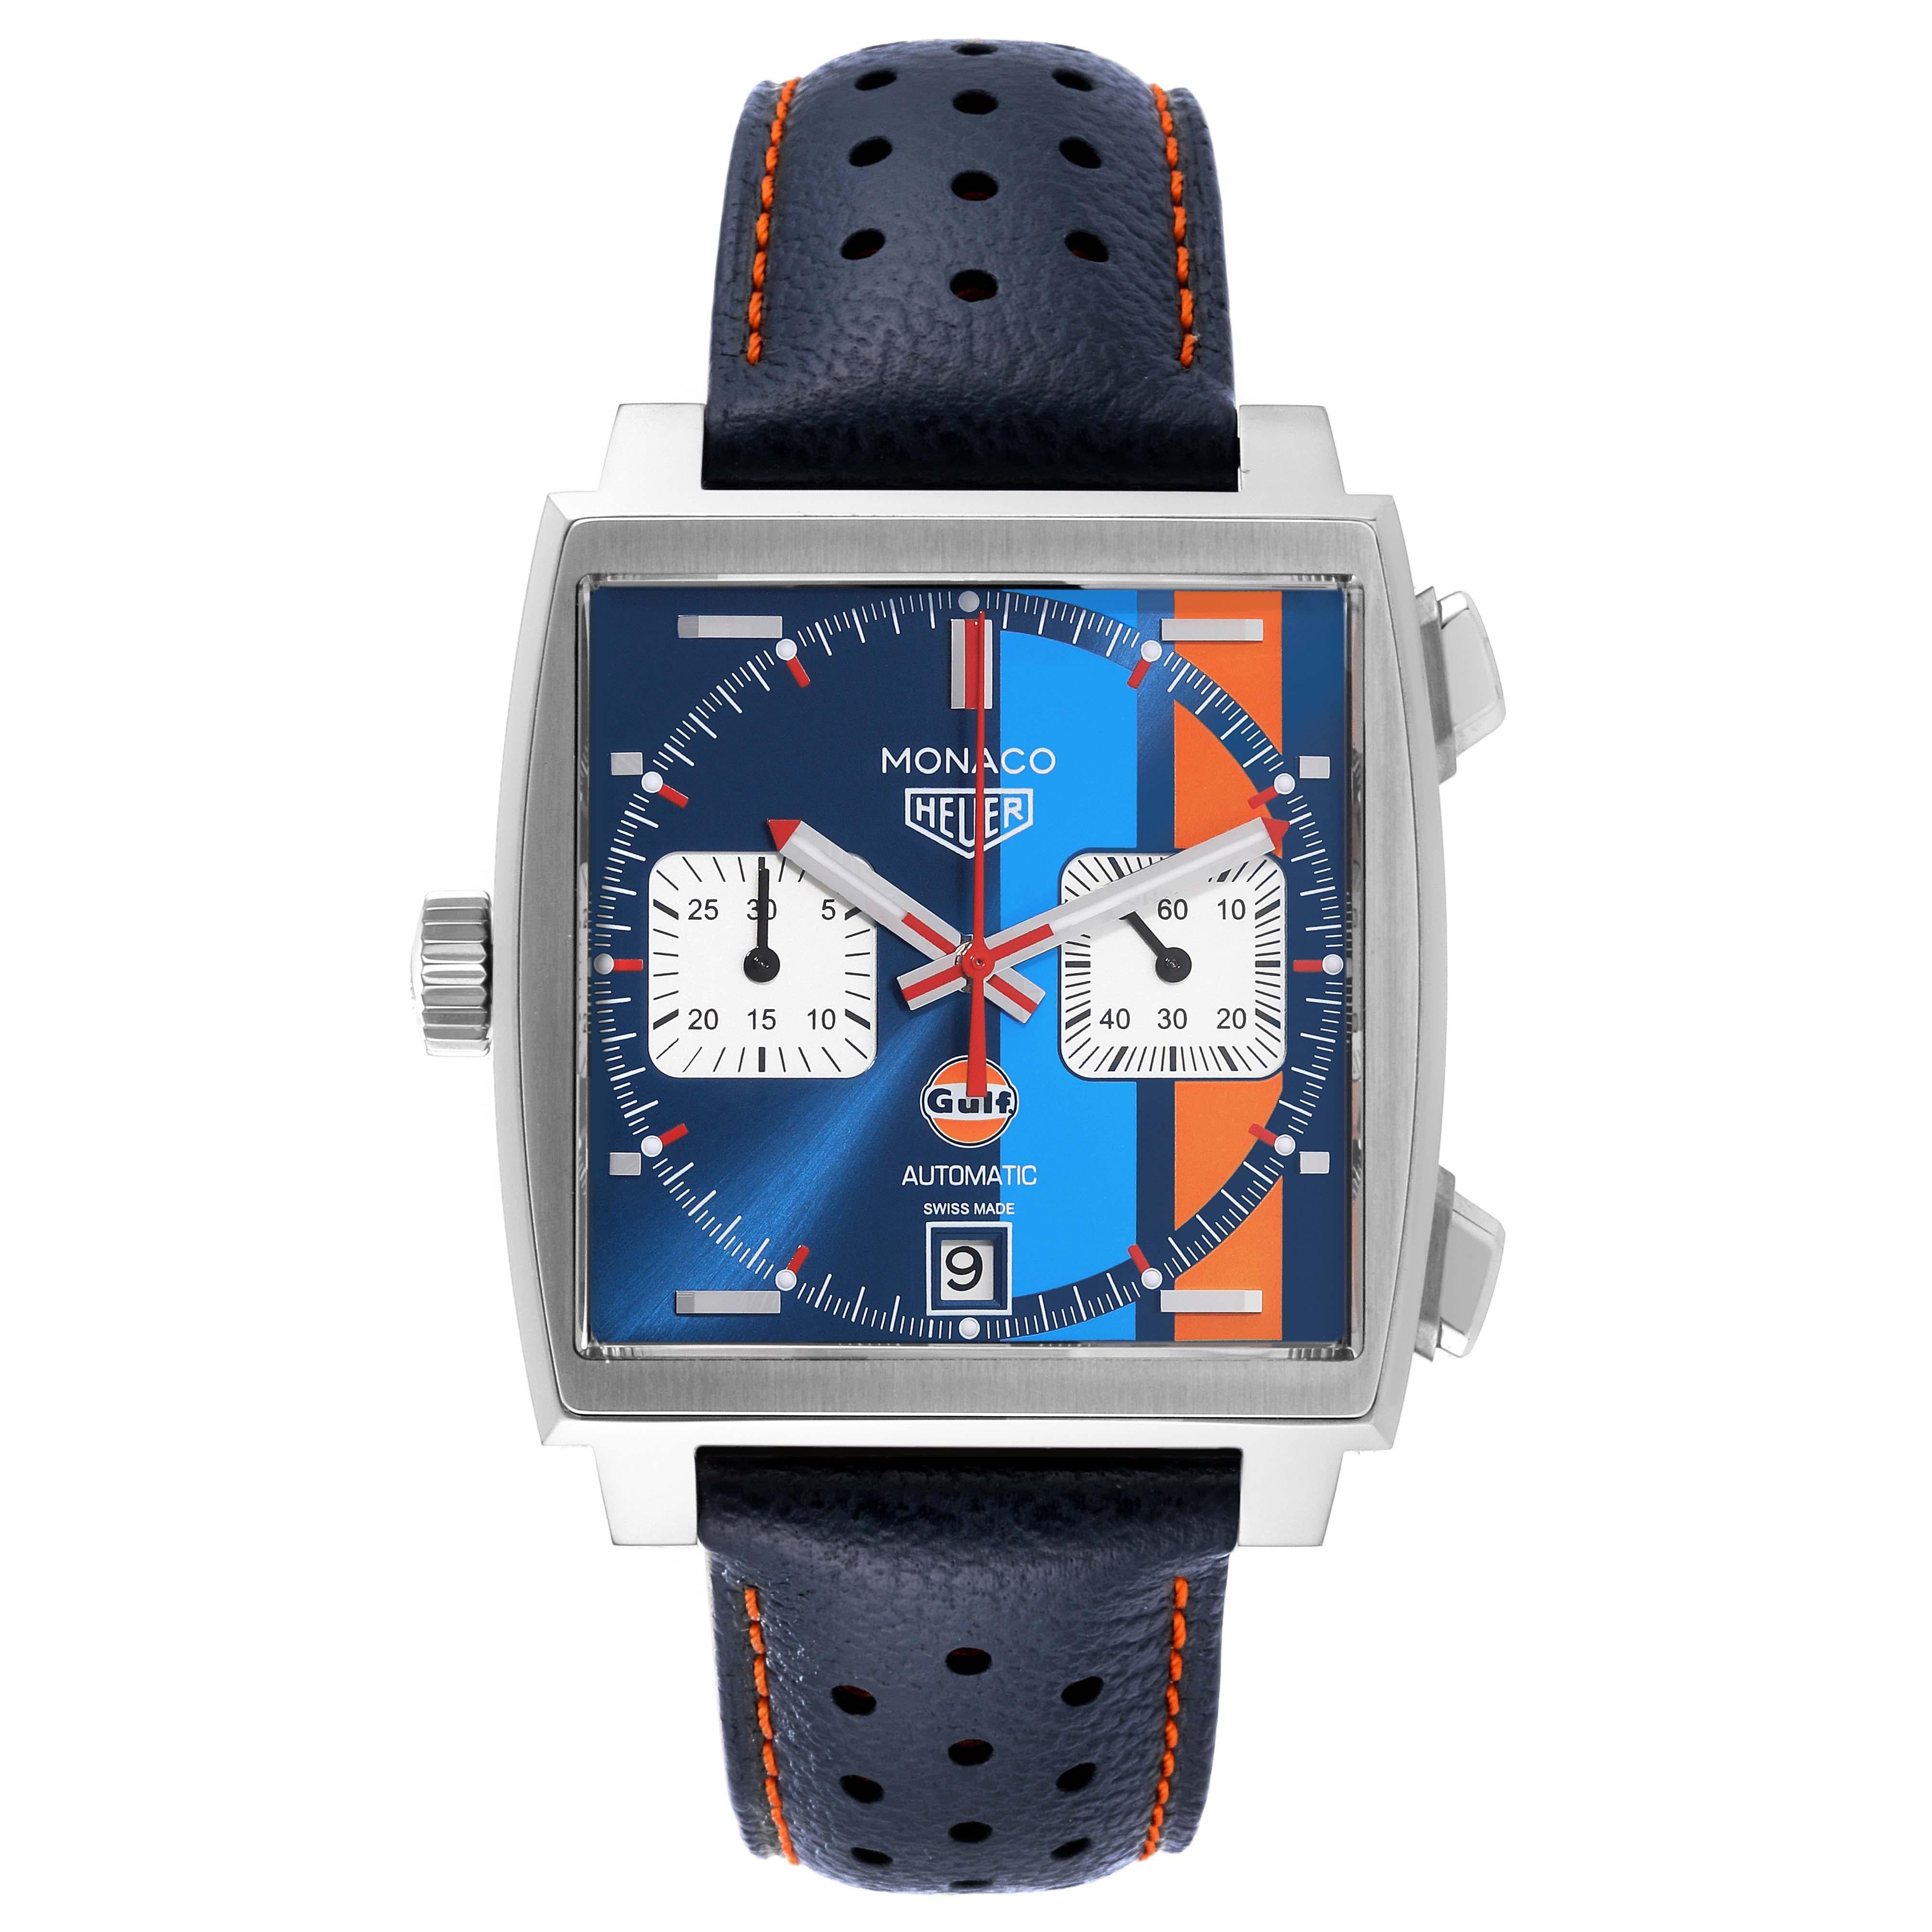 Tag Heuer Monaco Gulf 2018 Chronograph Steel Mens Watch CAW211R Box Card. Automatic self-winding chronograph movement. Alternate fine-brushed and polished stainless steel case 39.0 x 39.0 mm.  Exhibition transparent sapphire crystal caseback.